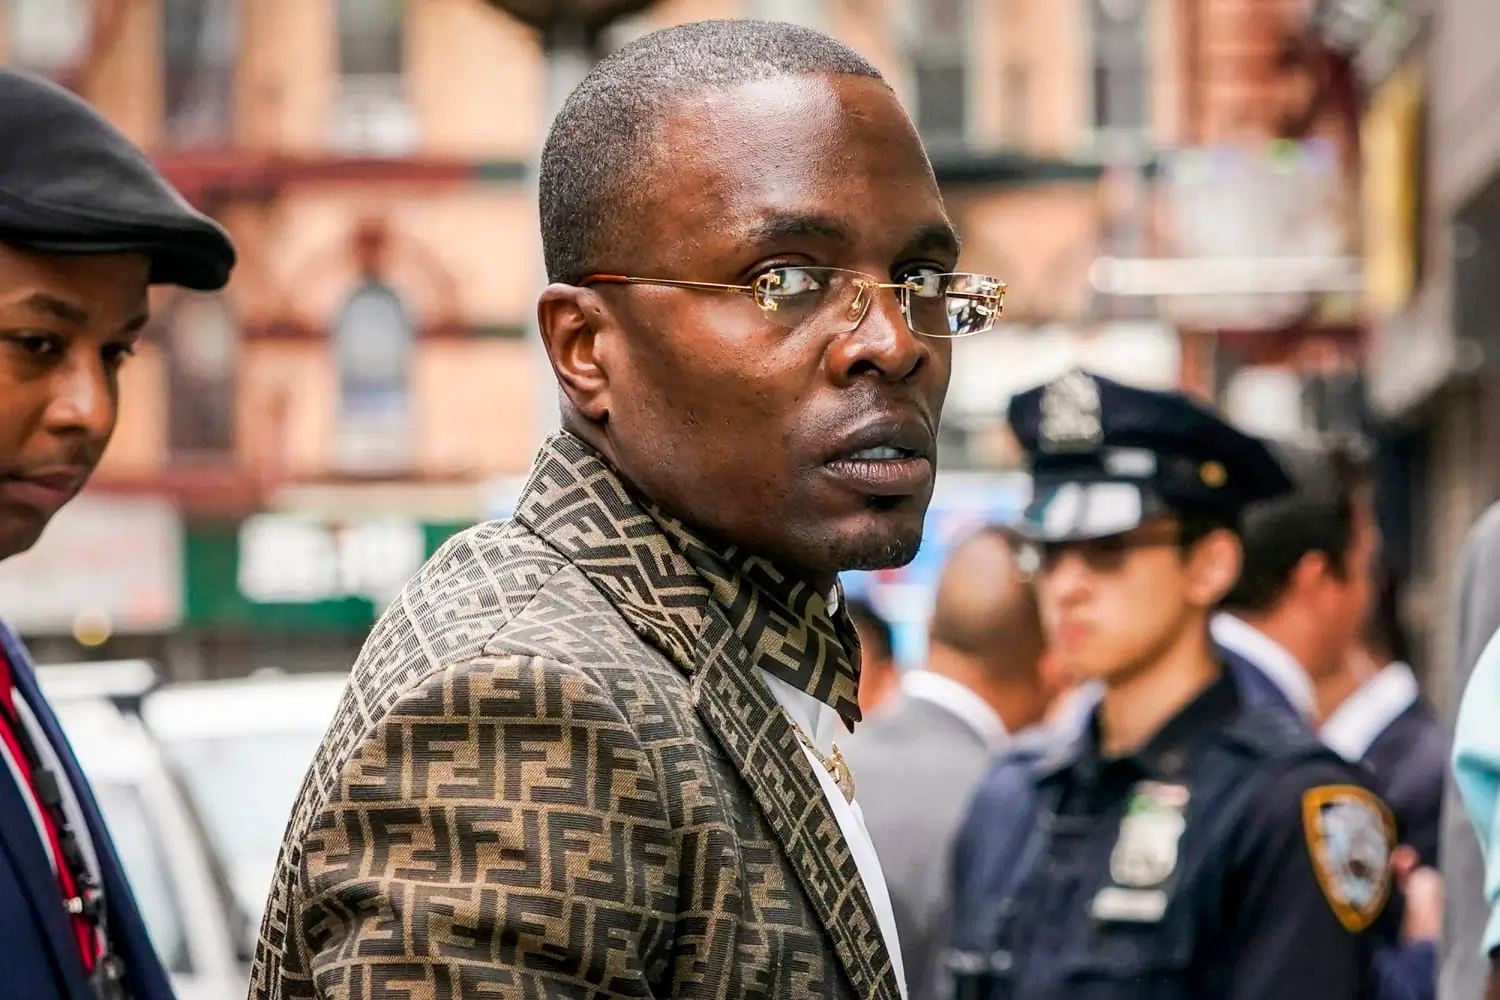 Bishop Lamor Whitehead, Adorned in Jail Attire, Learns His Fate for Stealing a NYC Woman's Retirement Fund